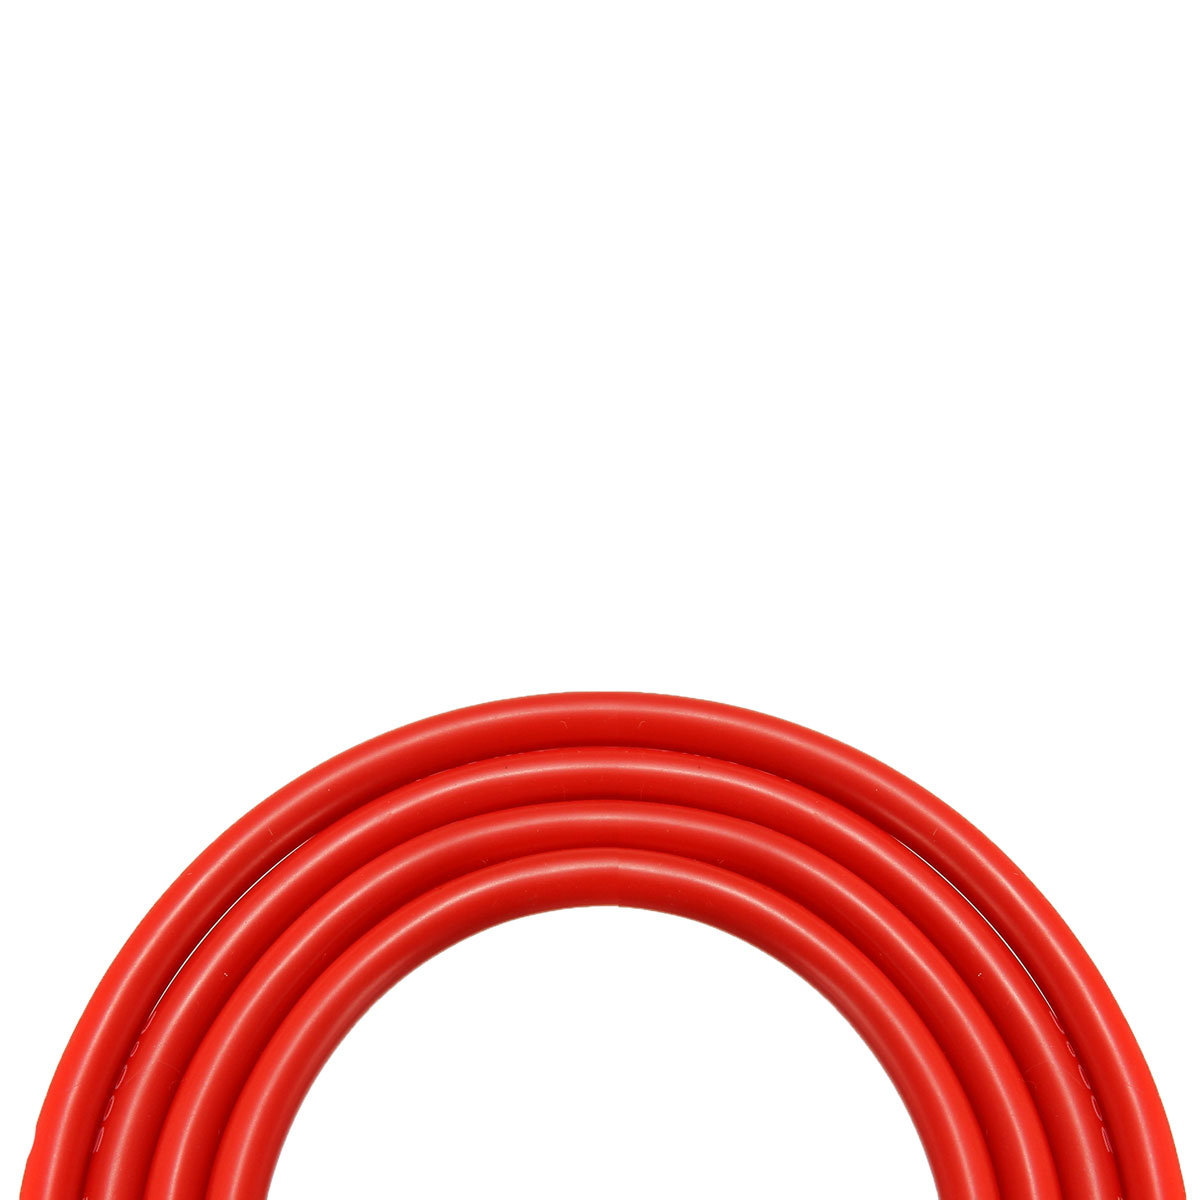 DANIU-5-Meter-Red-Silicone-Wire-Cable-10121416182022AWG-Flexible-Cable-1170292-7